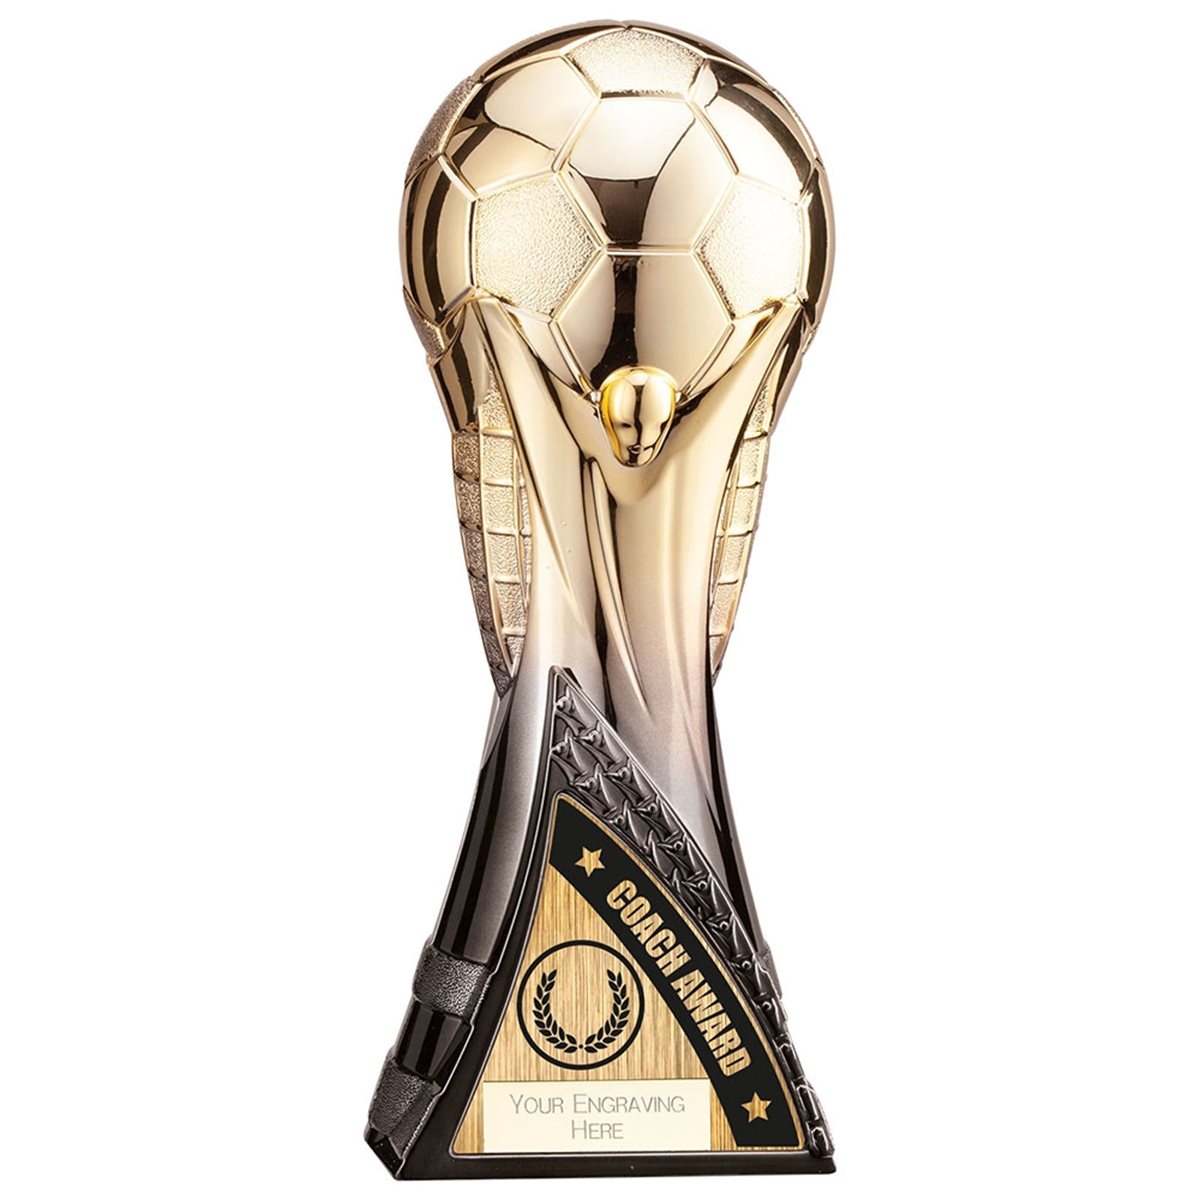 World Trophy Gold to Black Football Award PM22181E (Click to see all awards)